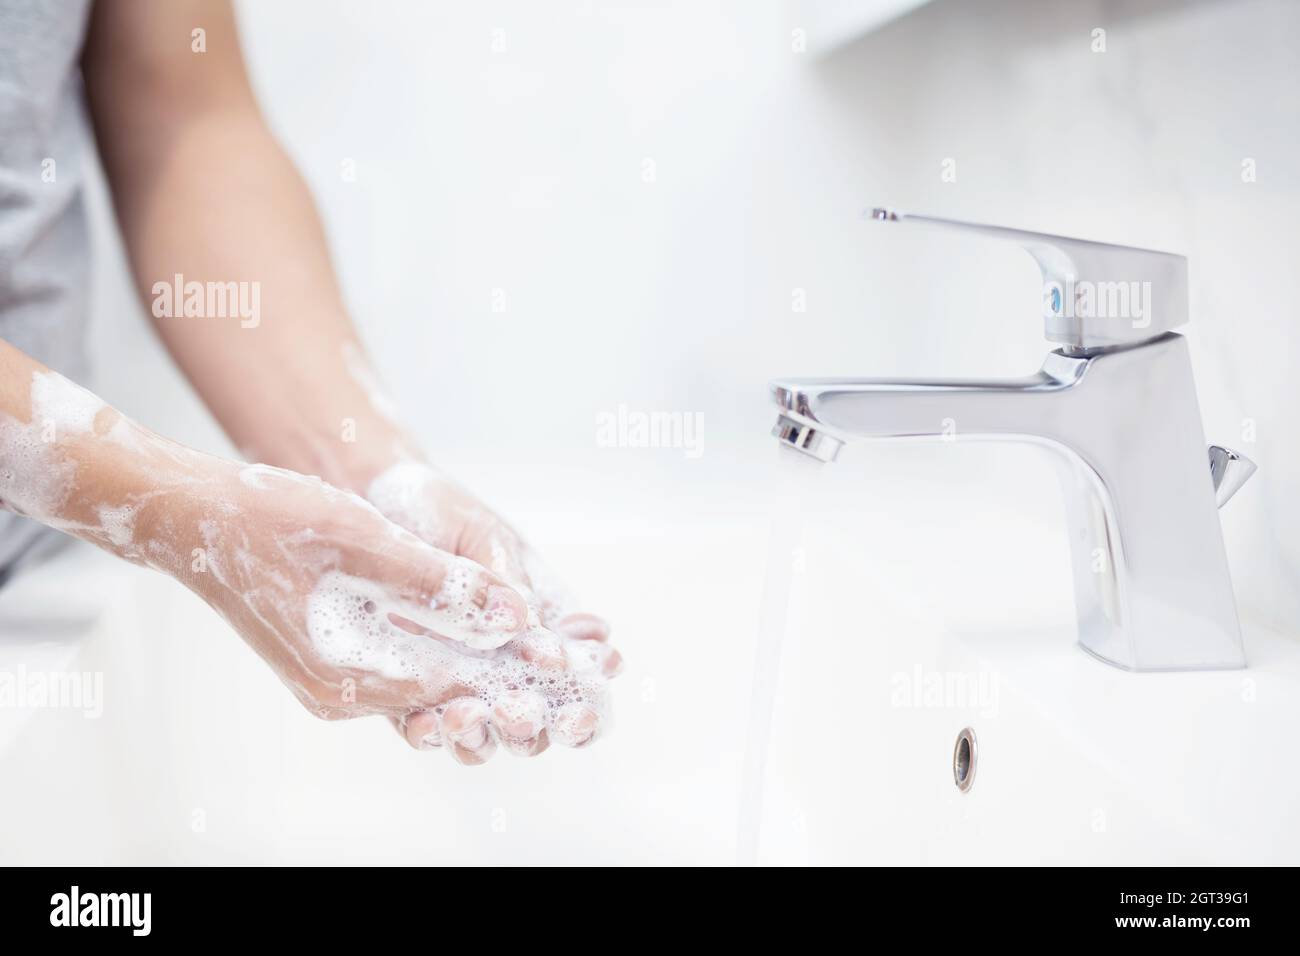 Men Are Washing Their Hands Before Eating Food Every Time To Prevent The Virus. Stock Photo